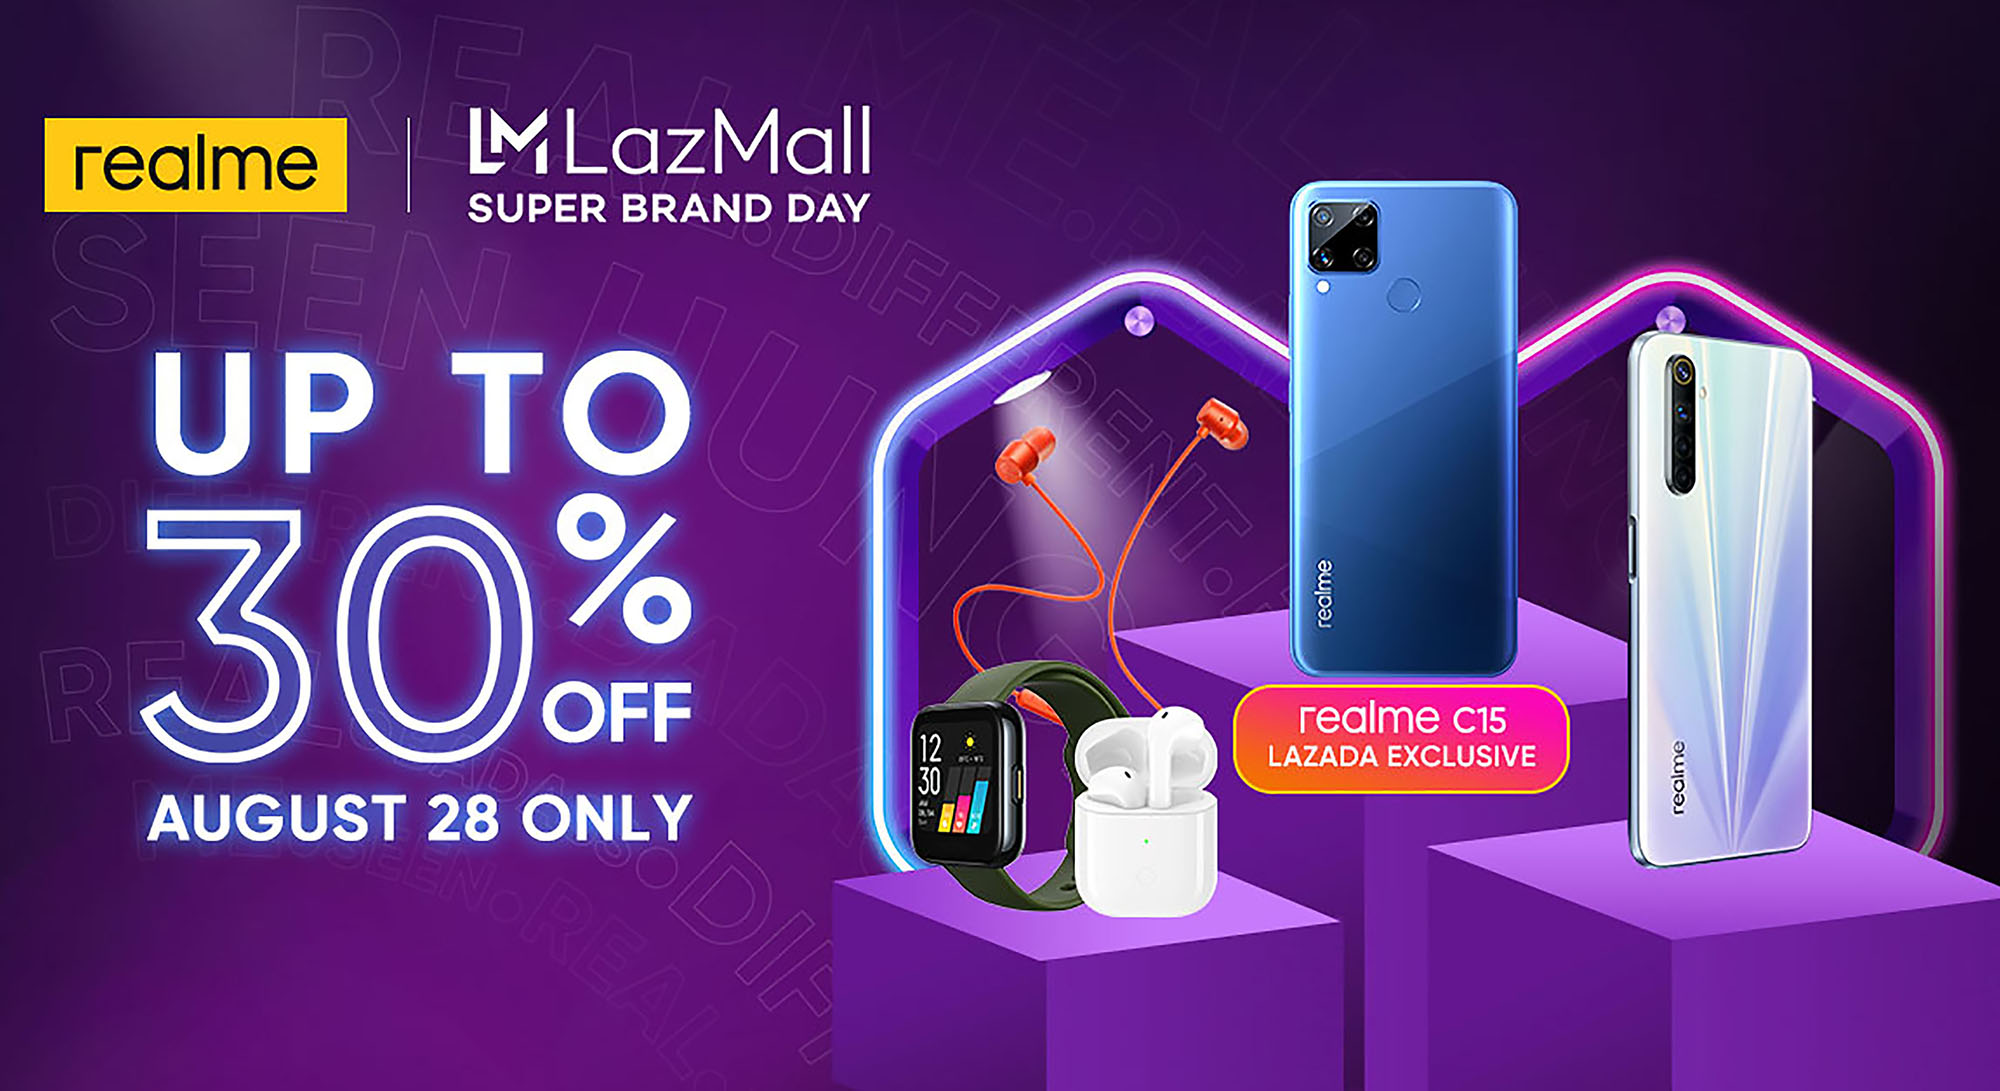 realme PH culminates month-long Fanfest on August 28  with a music festival and a Lazada sale